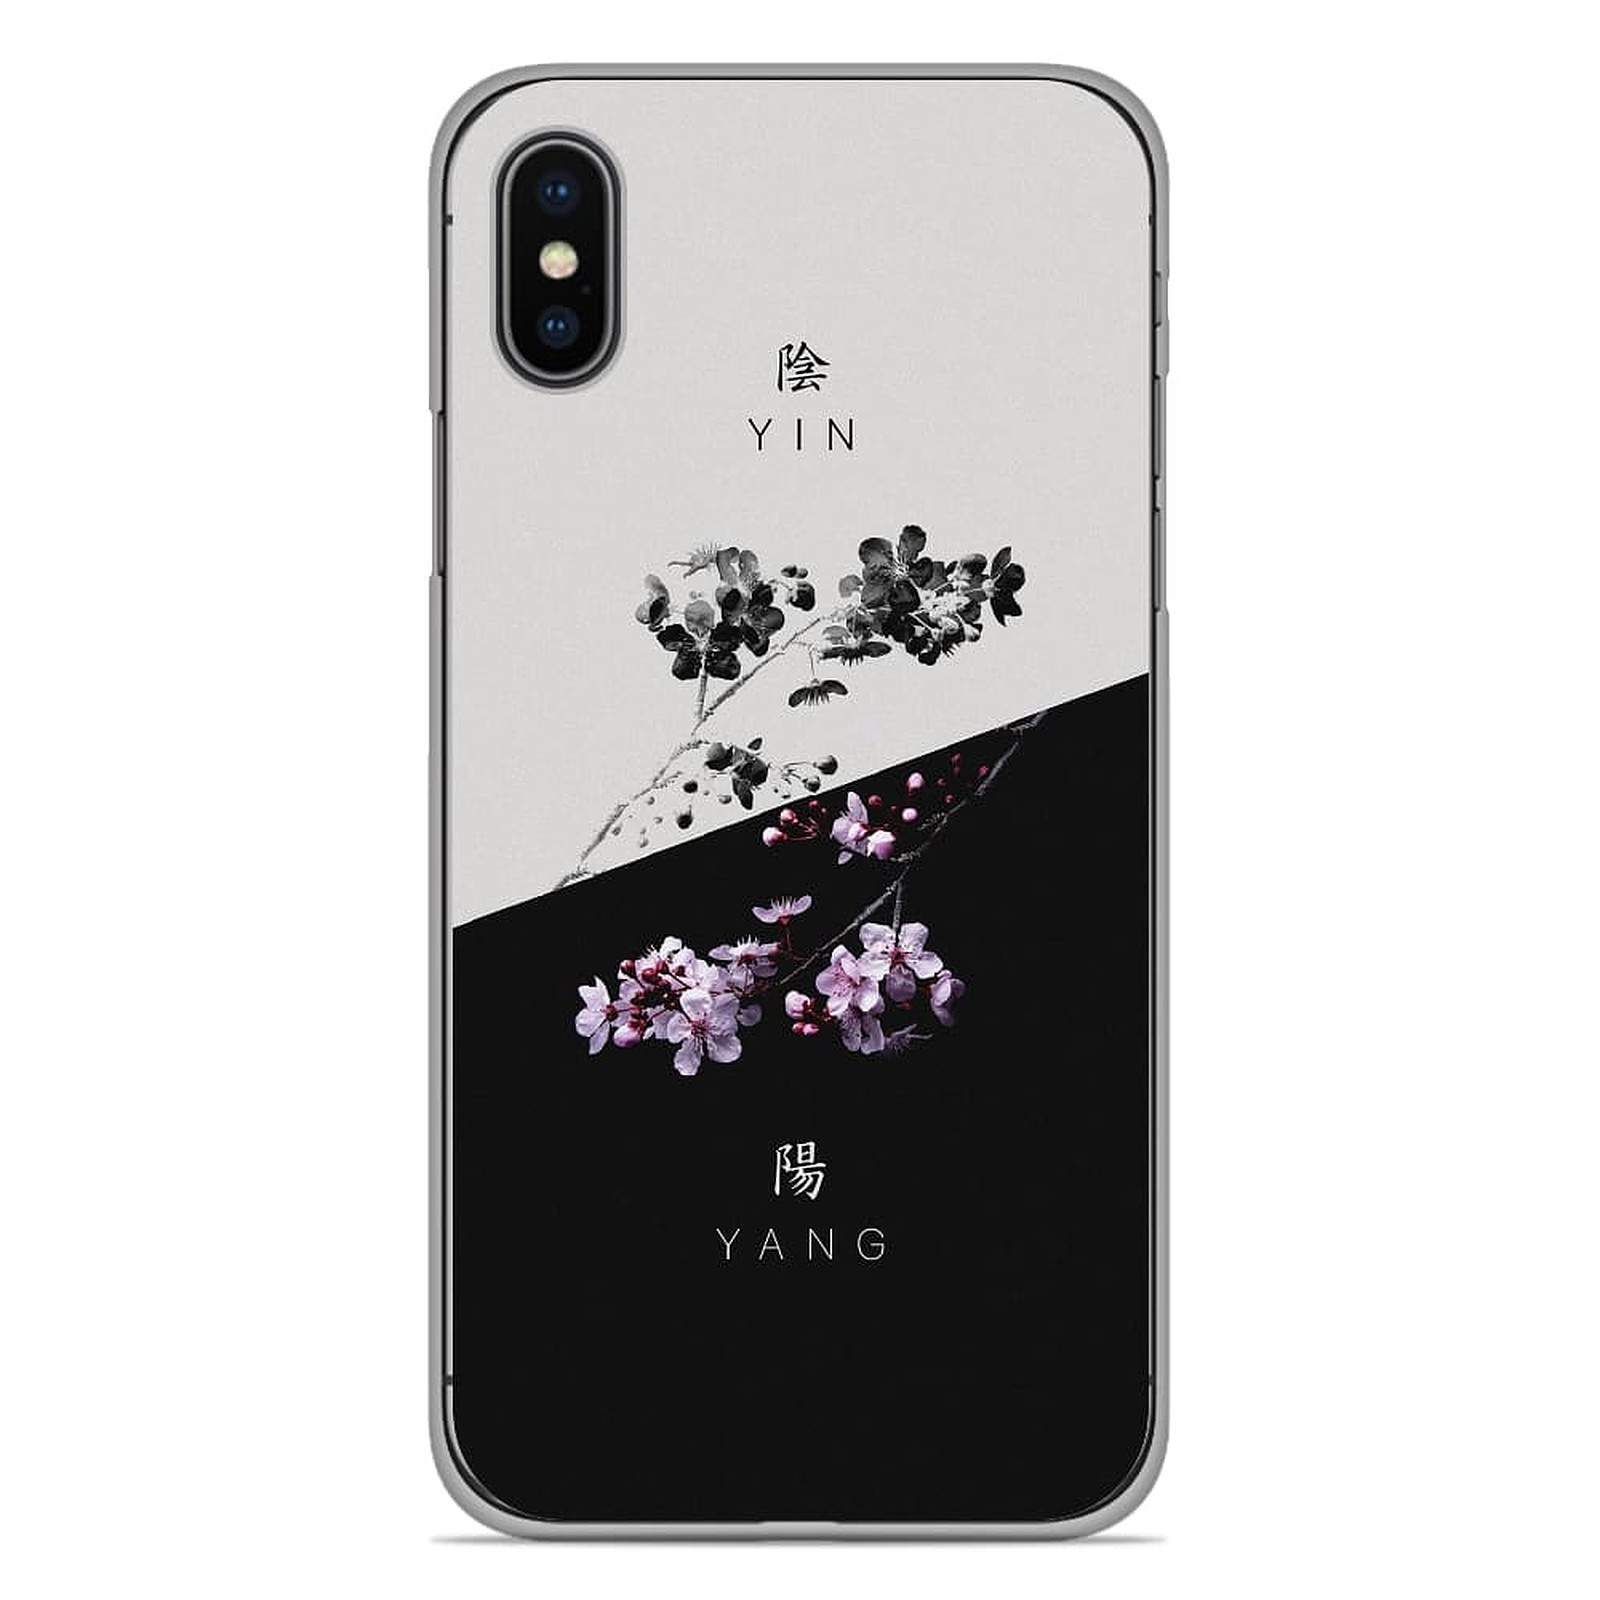 1001 Coques Coque silicone gel Apple iPhone XS Max motif Yin et Yang - Coque telephone 1001Coques